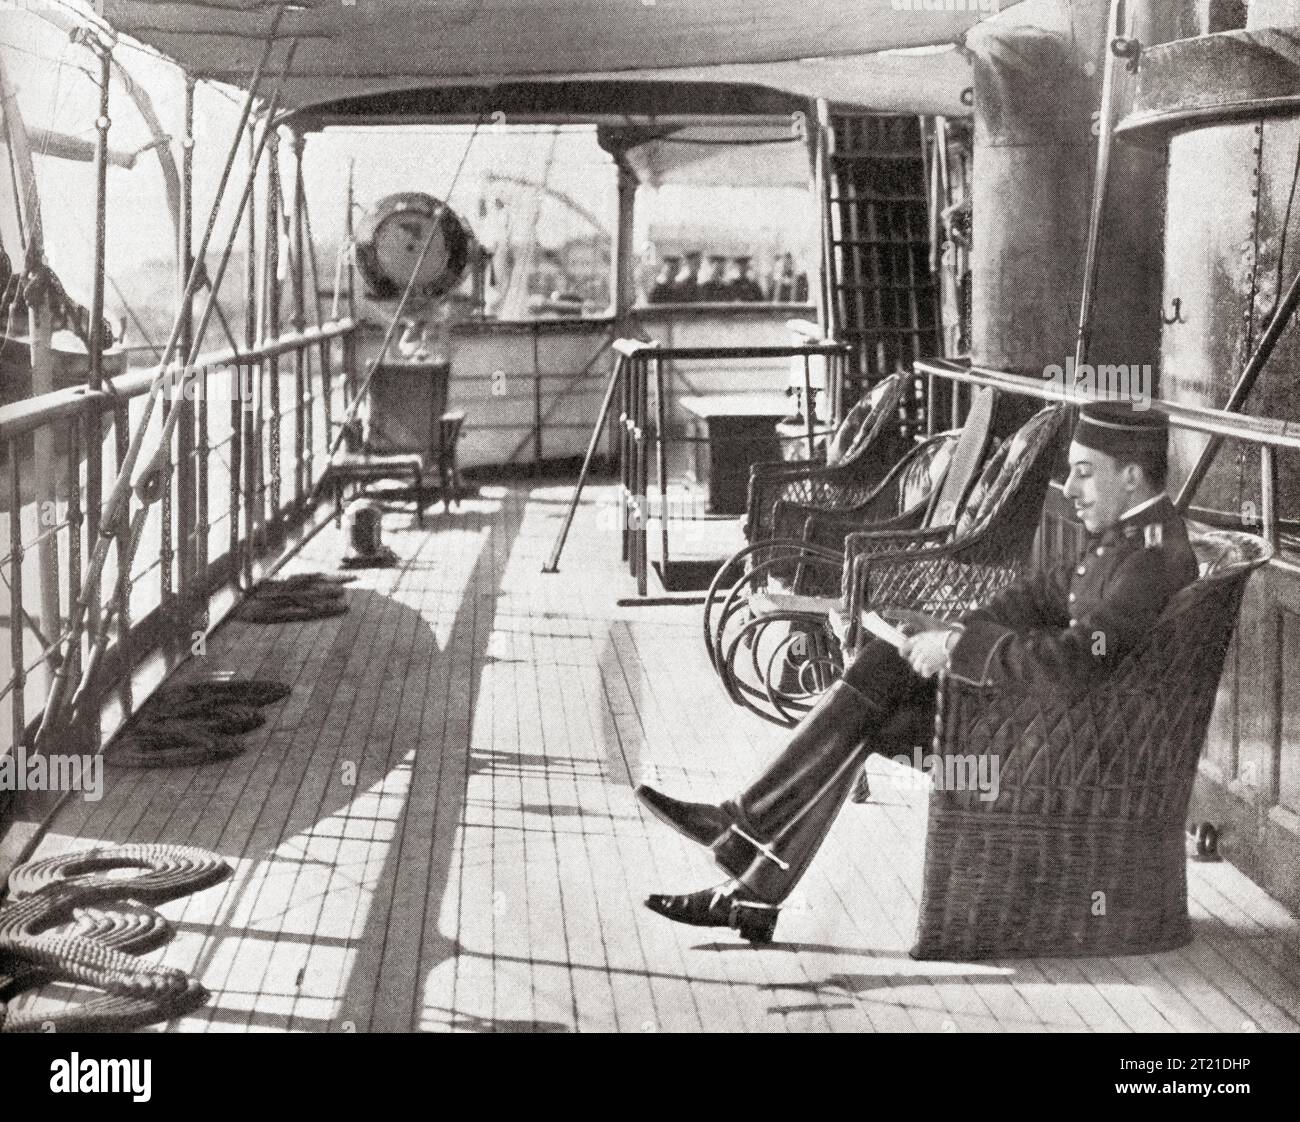 King Alfonso XIII seen here reading a letter whilst on board the Giralda, during his journey from Santander to San Sebastian in 1912. Alfonso XIII, 1886 –  1941, aka El Africano or the African. King of Spain. From Mundo Grafico, published 1912. Stock Photo